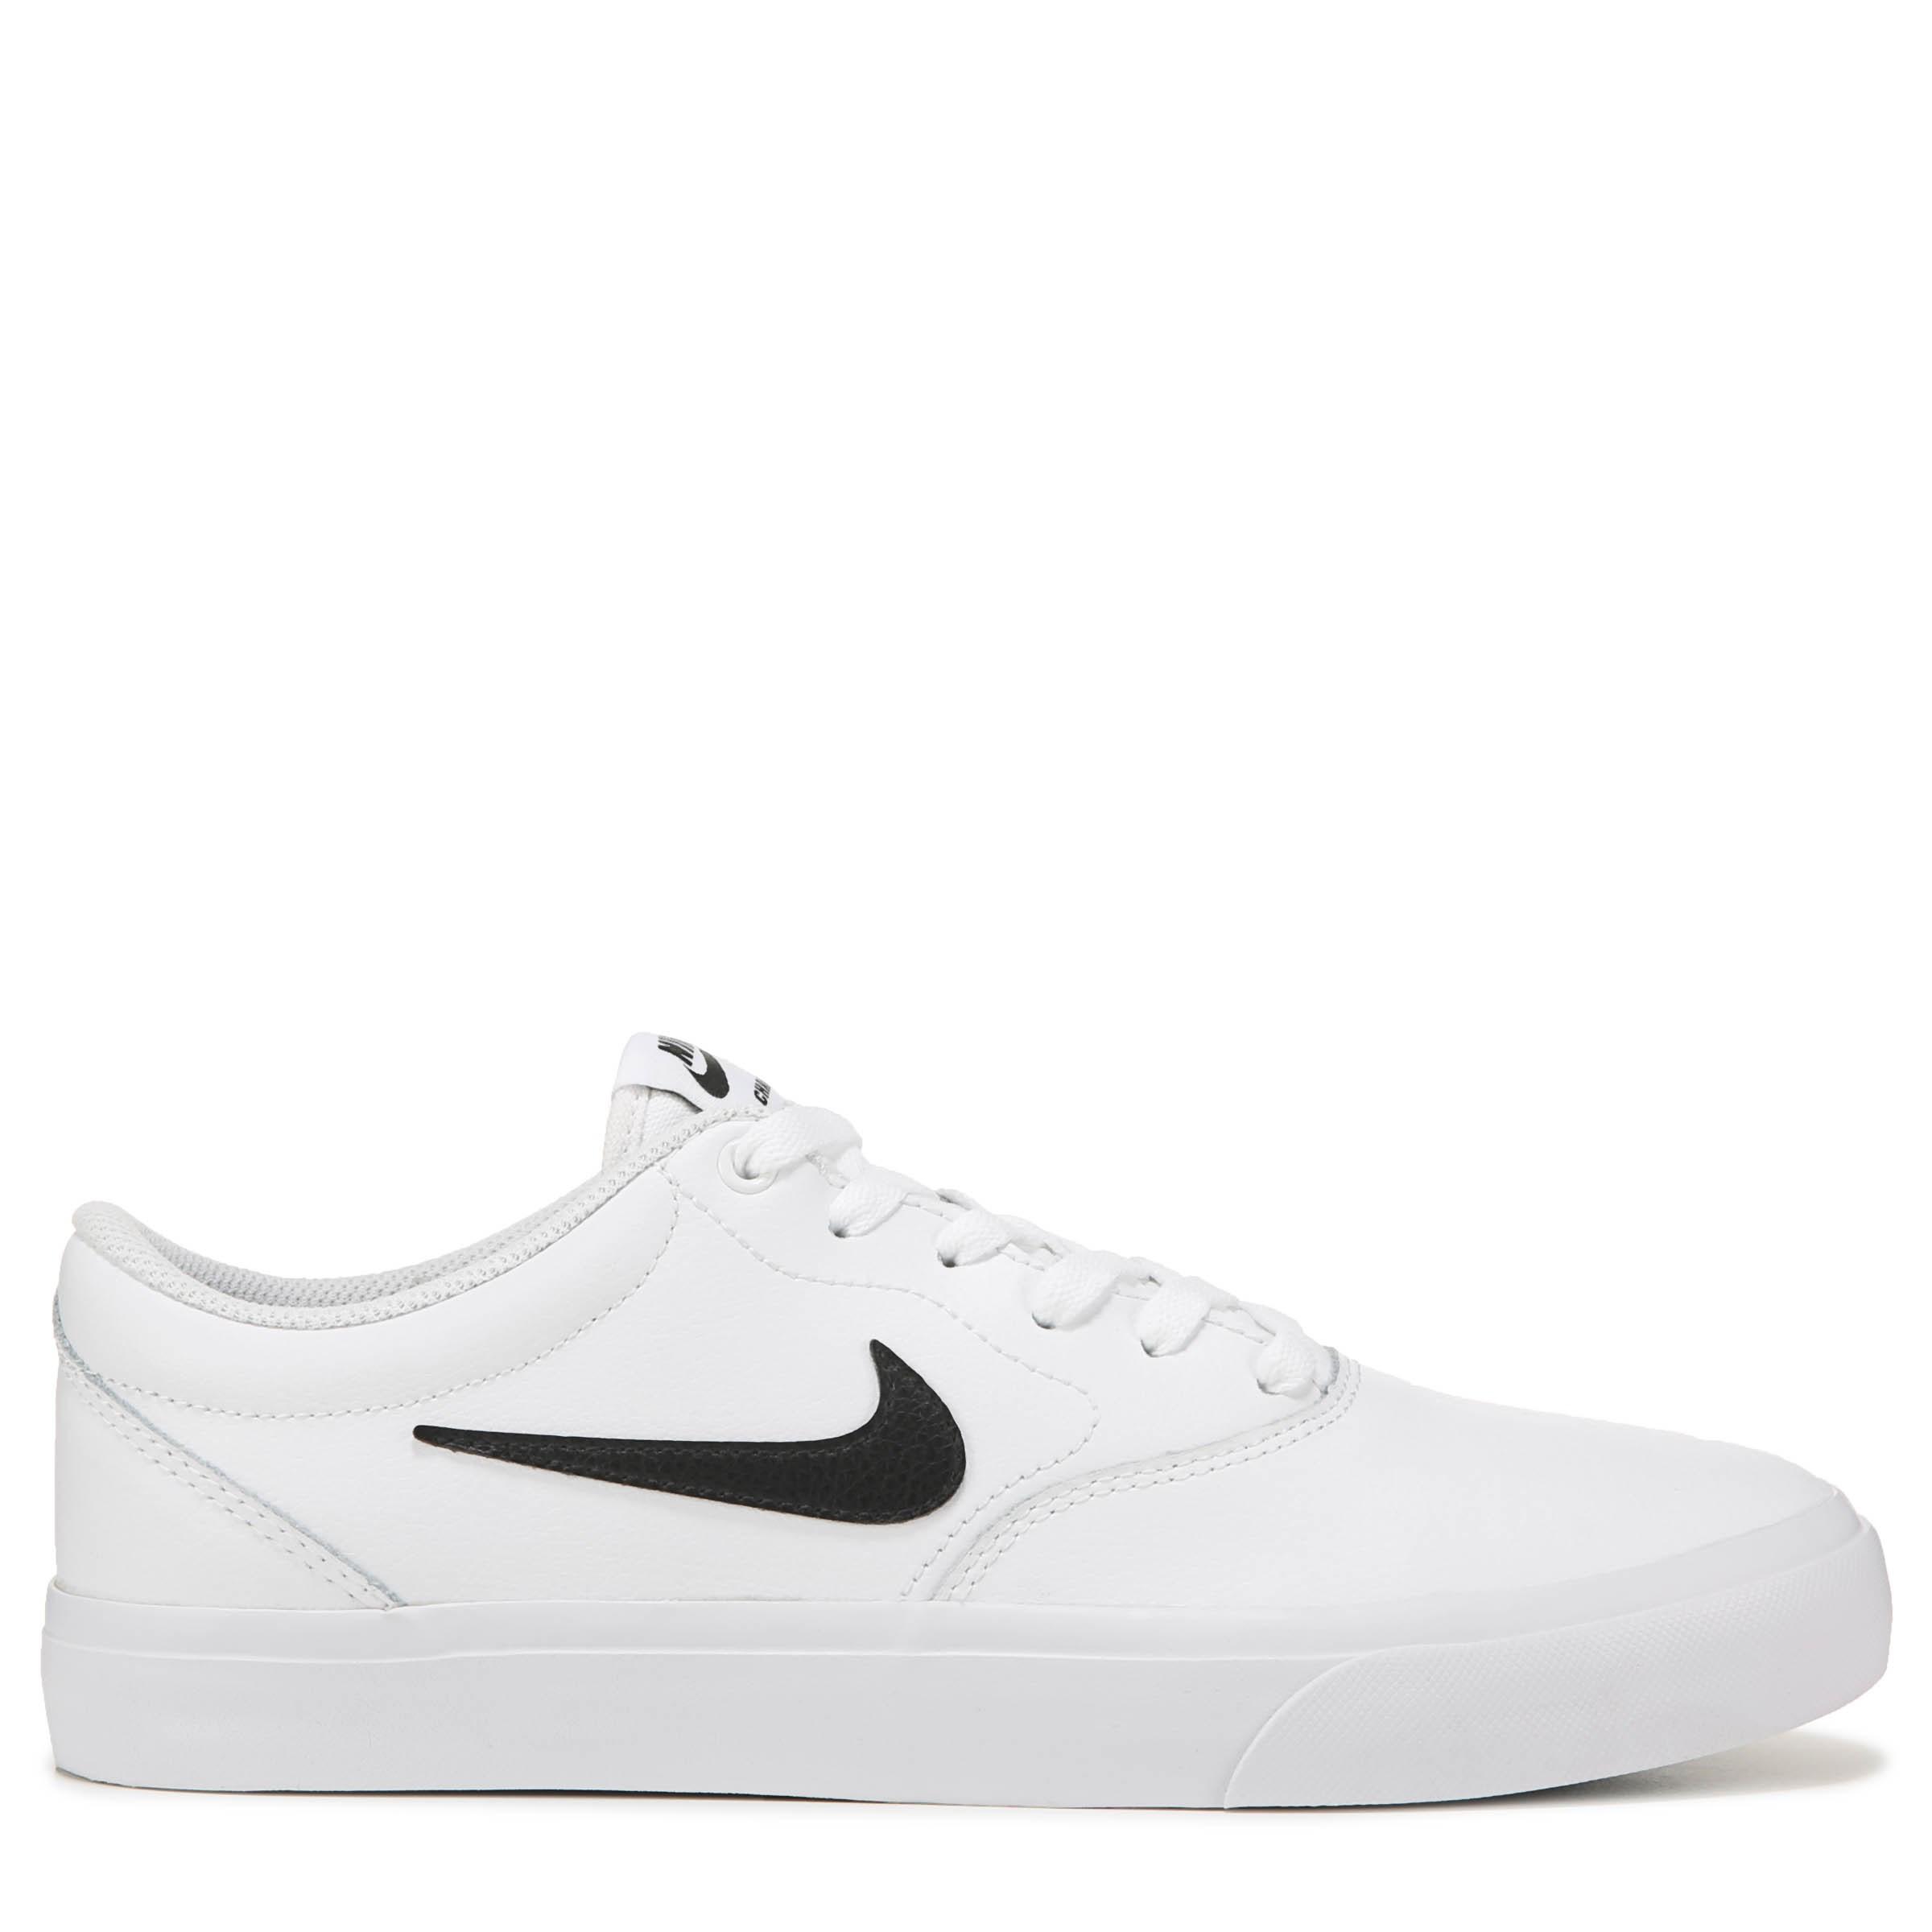 Nike Sb Charge Leather Skate Shoes in White/Black (White) for Men - Lyst